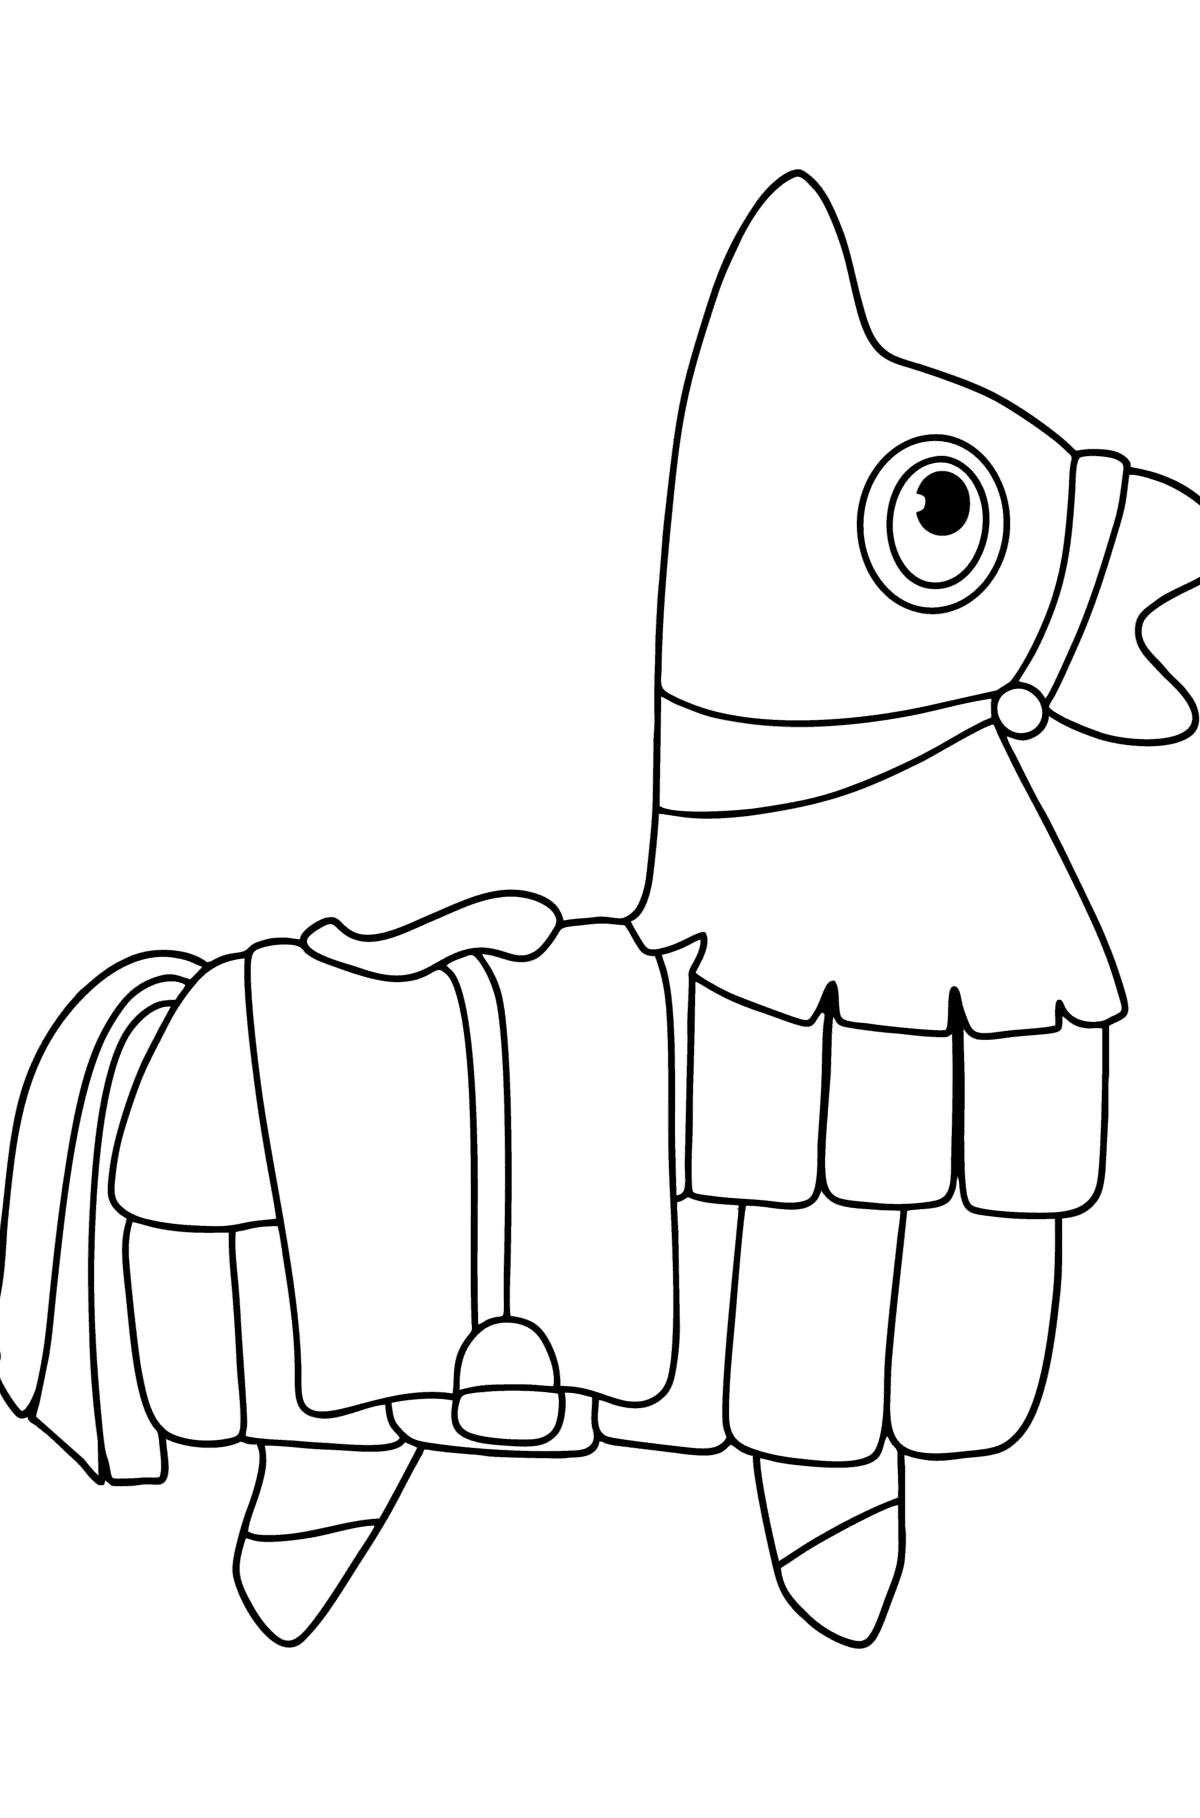 Fortnite Llama coloring page - Coloring Pages for Kids